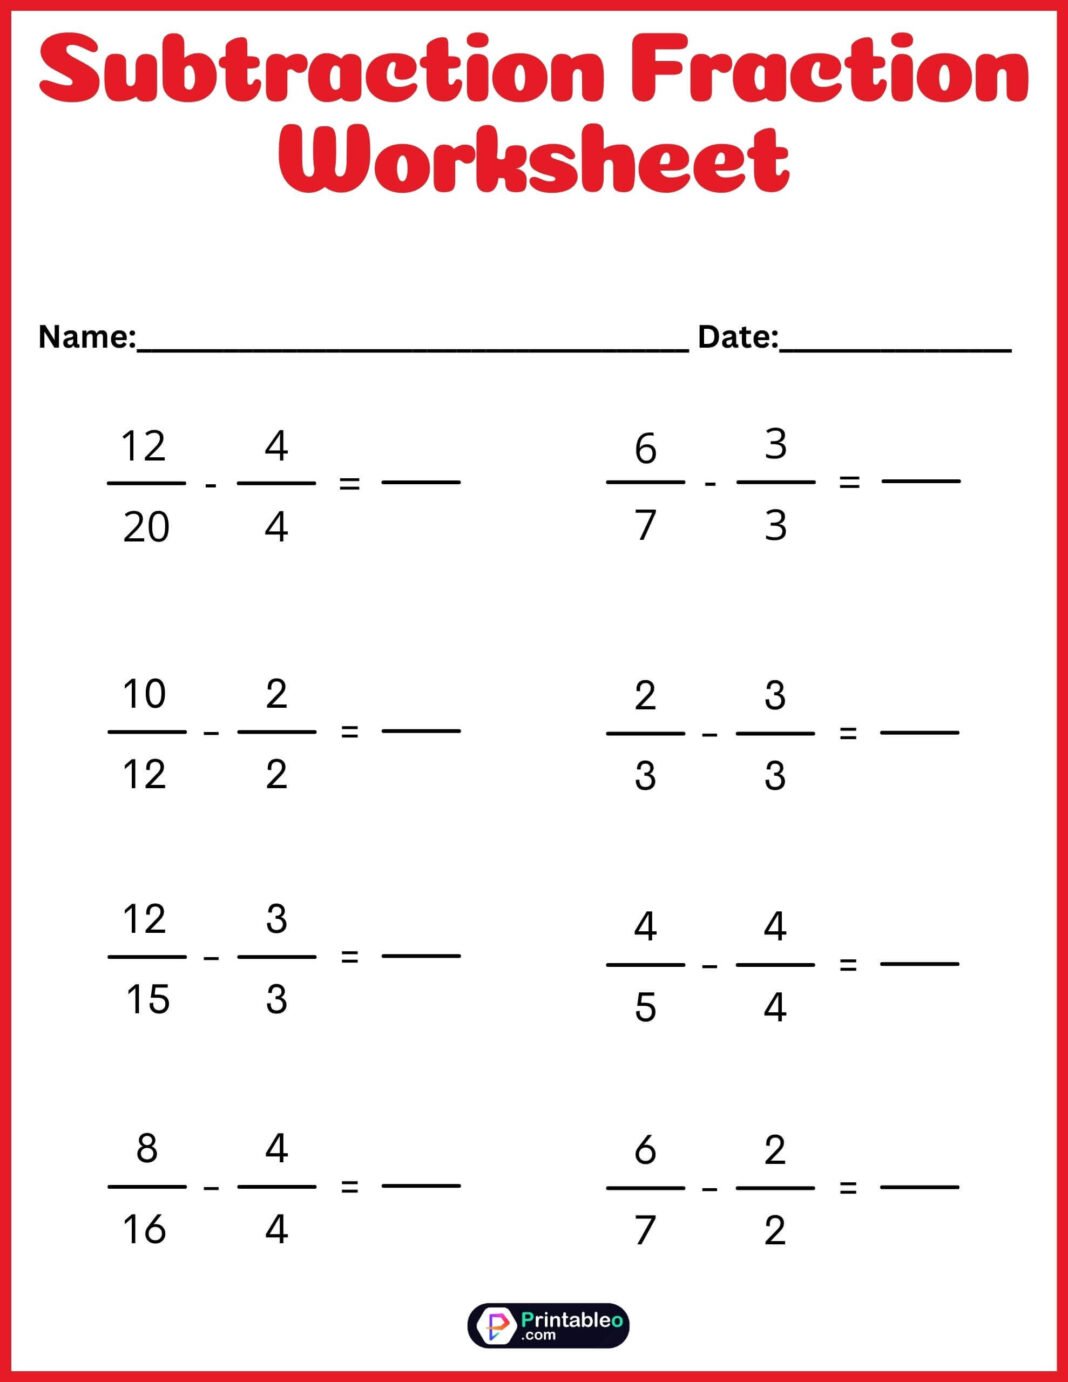 subtractions-fraction-worksheets-free-download